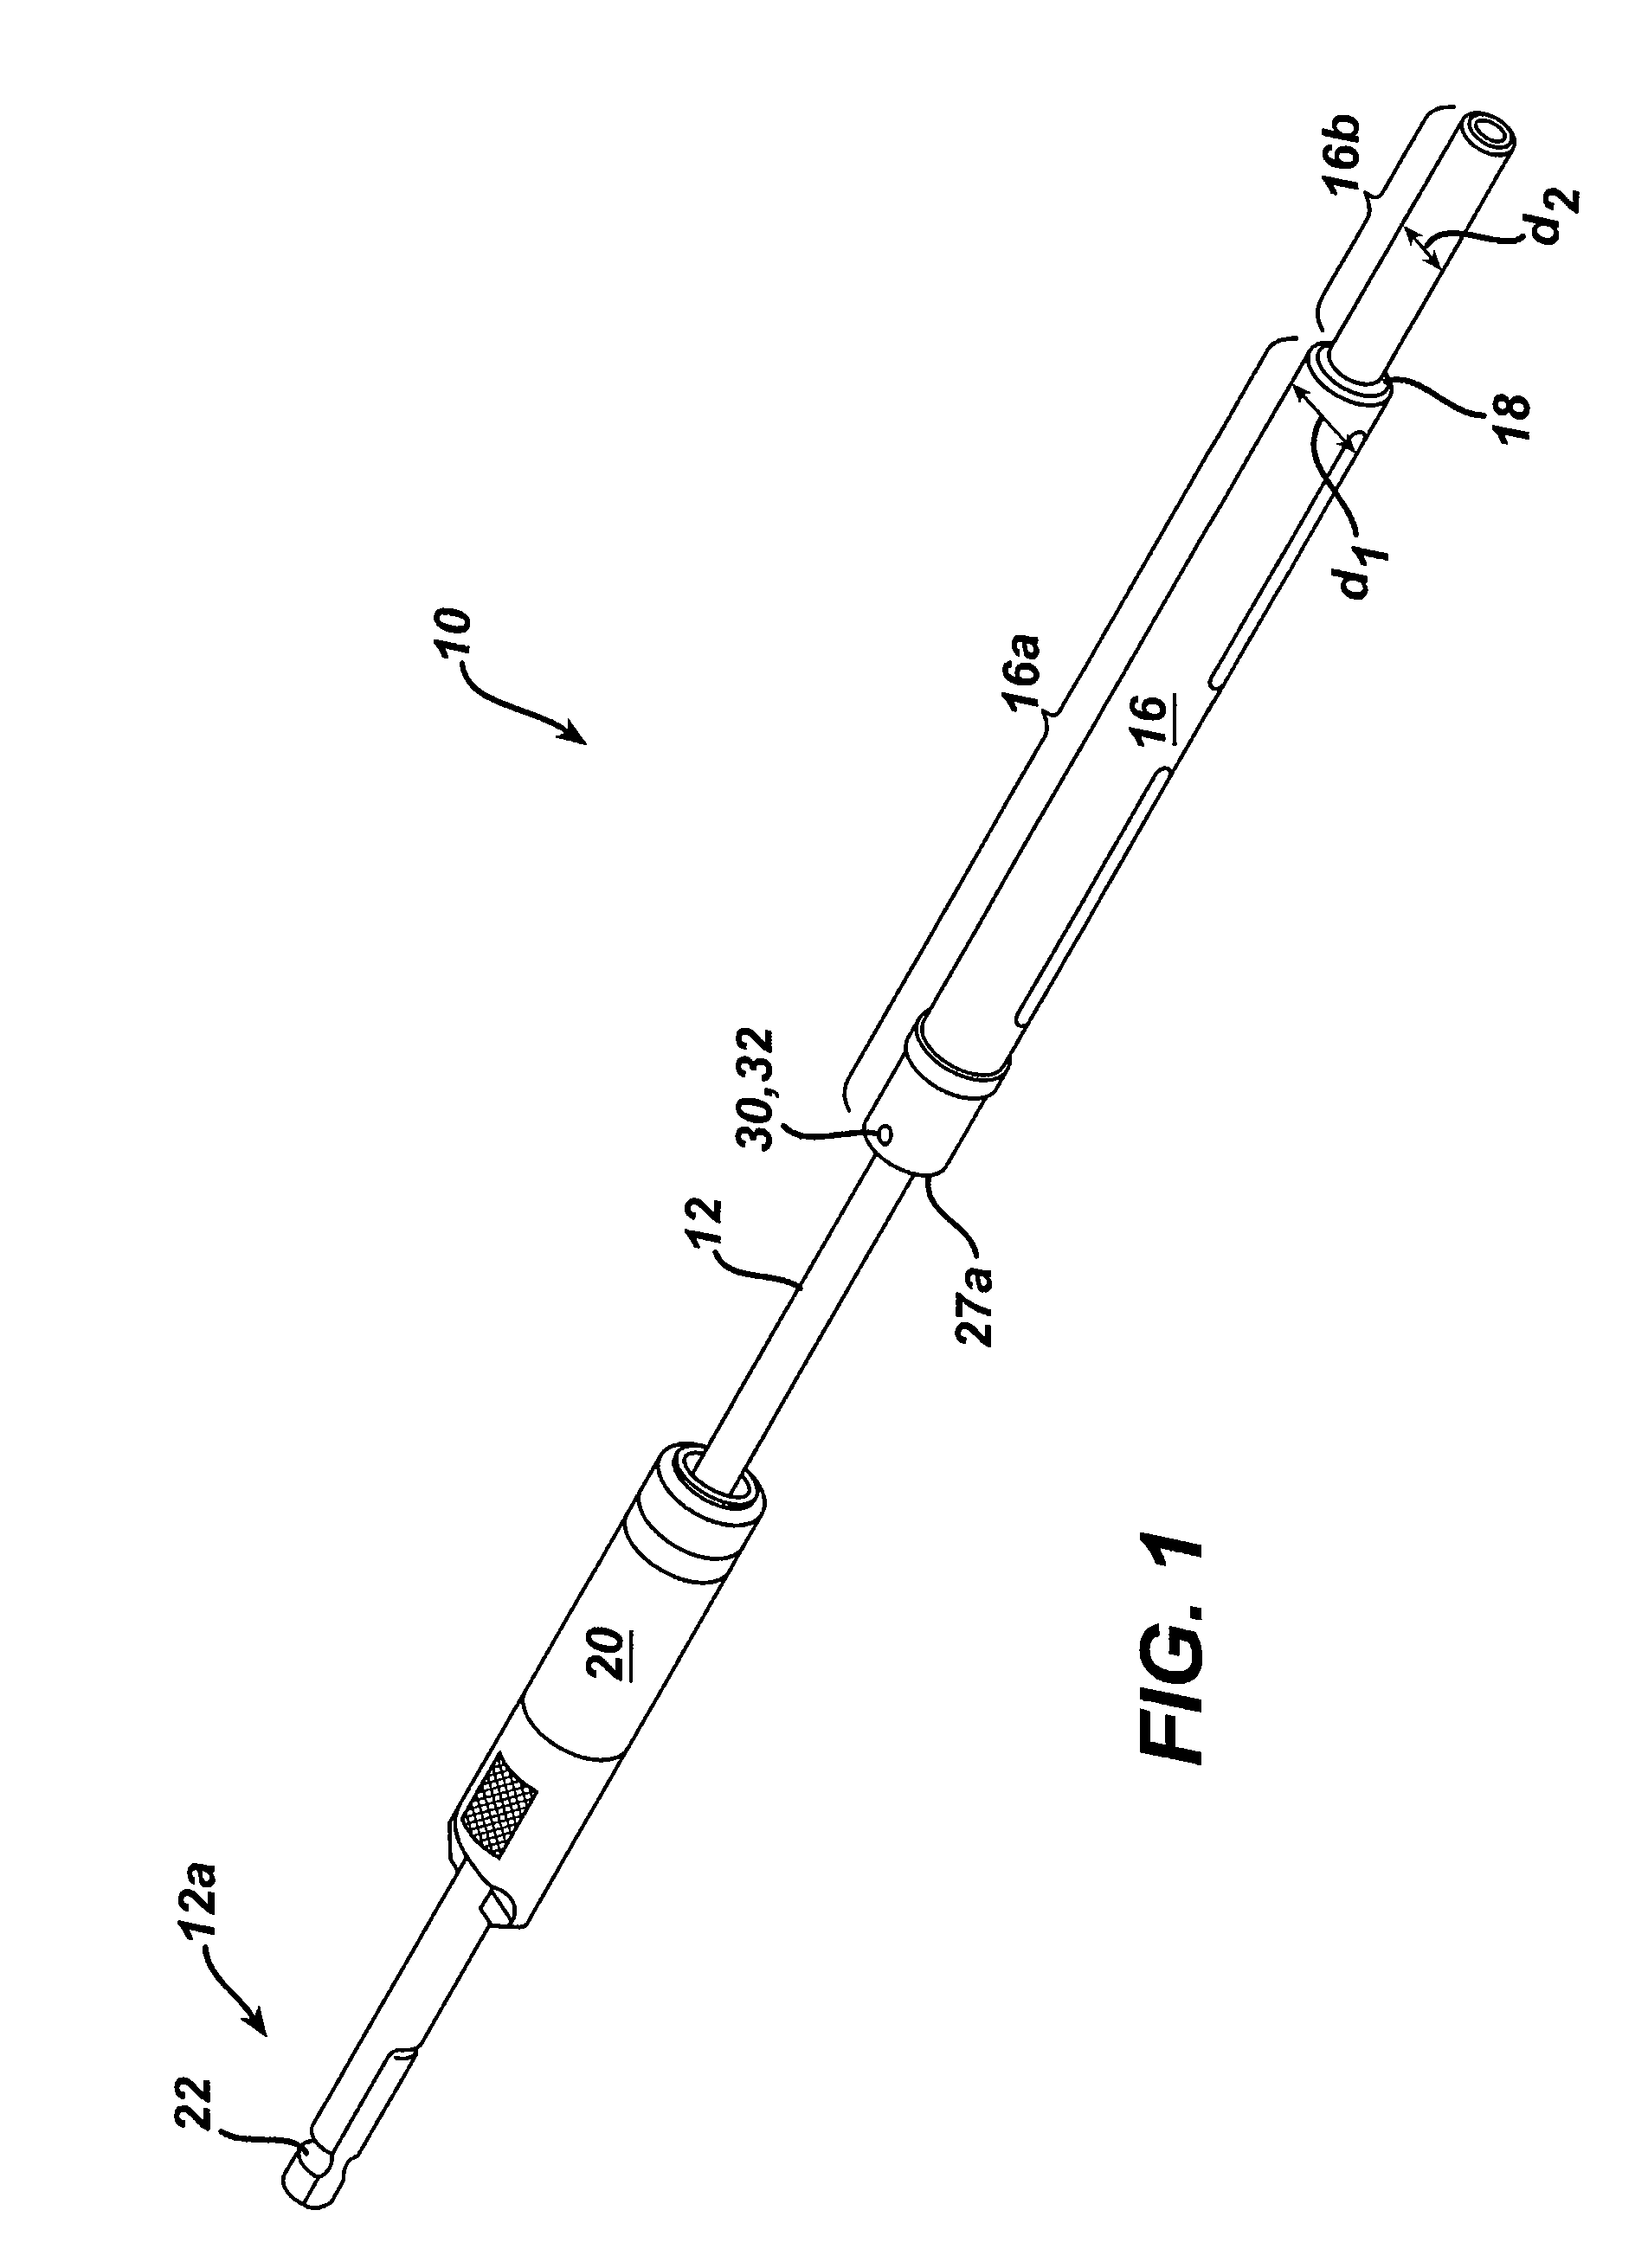 Variable depth drill with self-centering sleeve